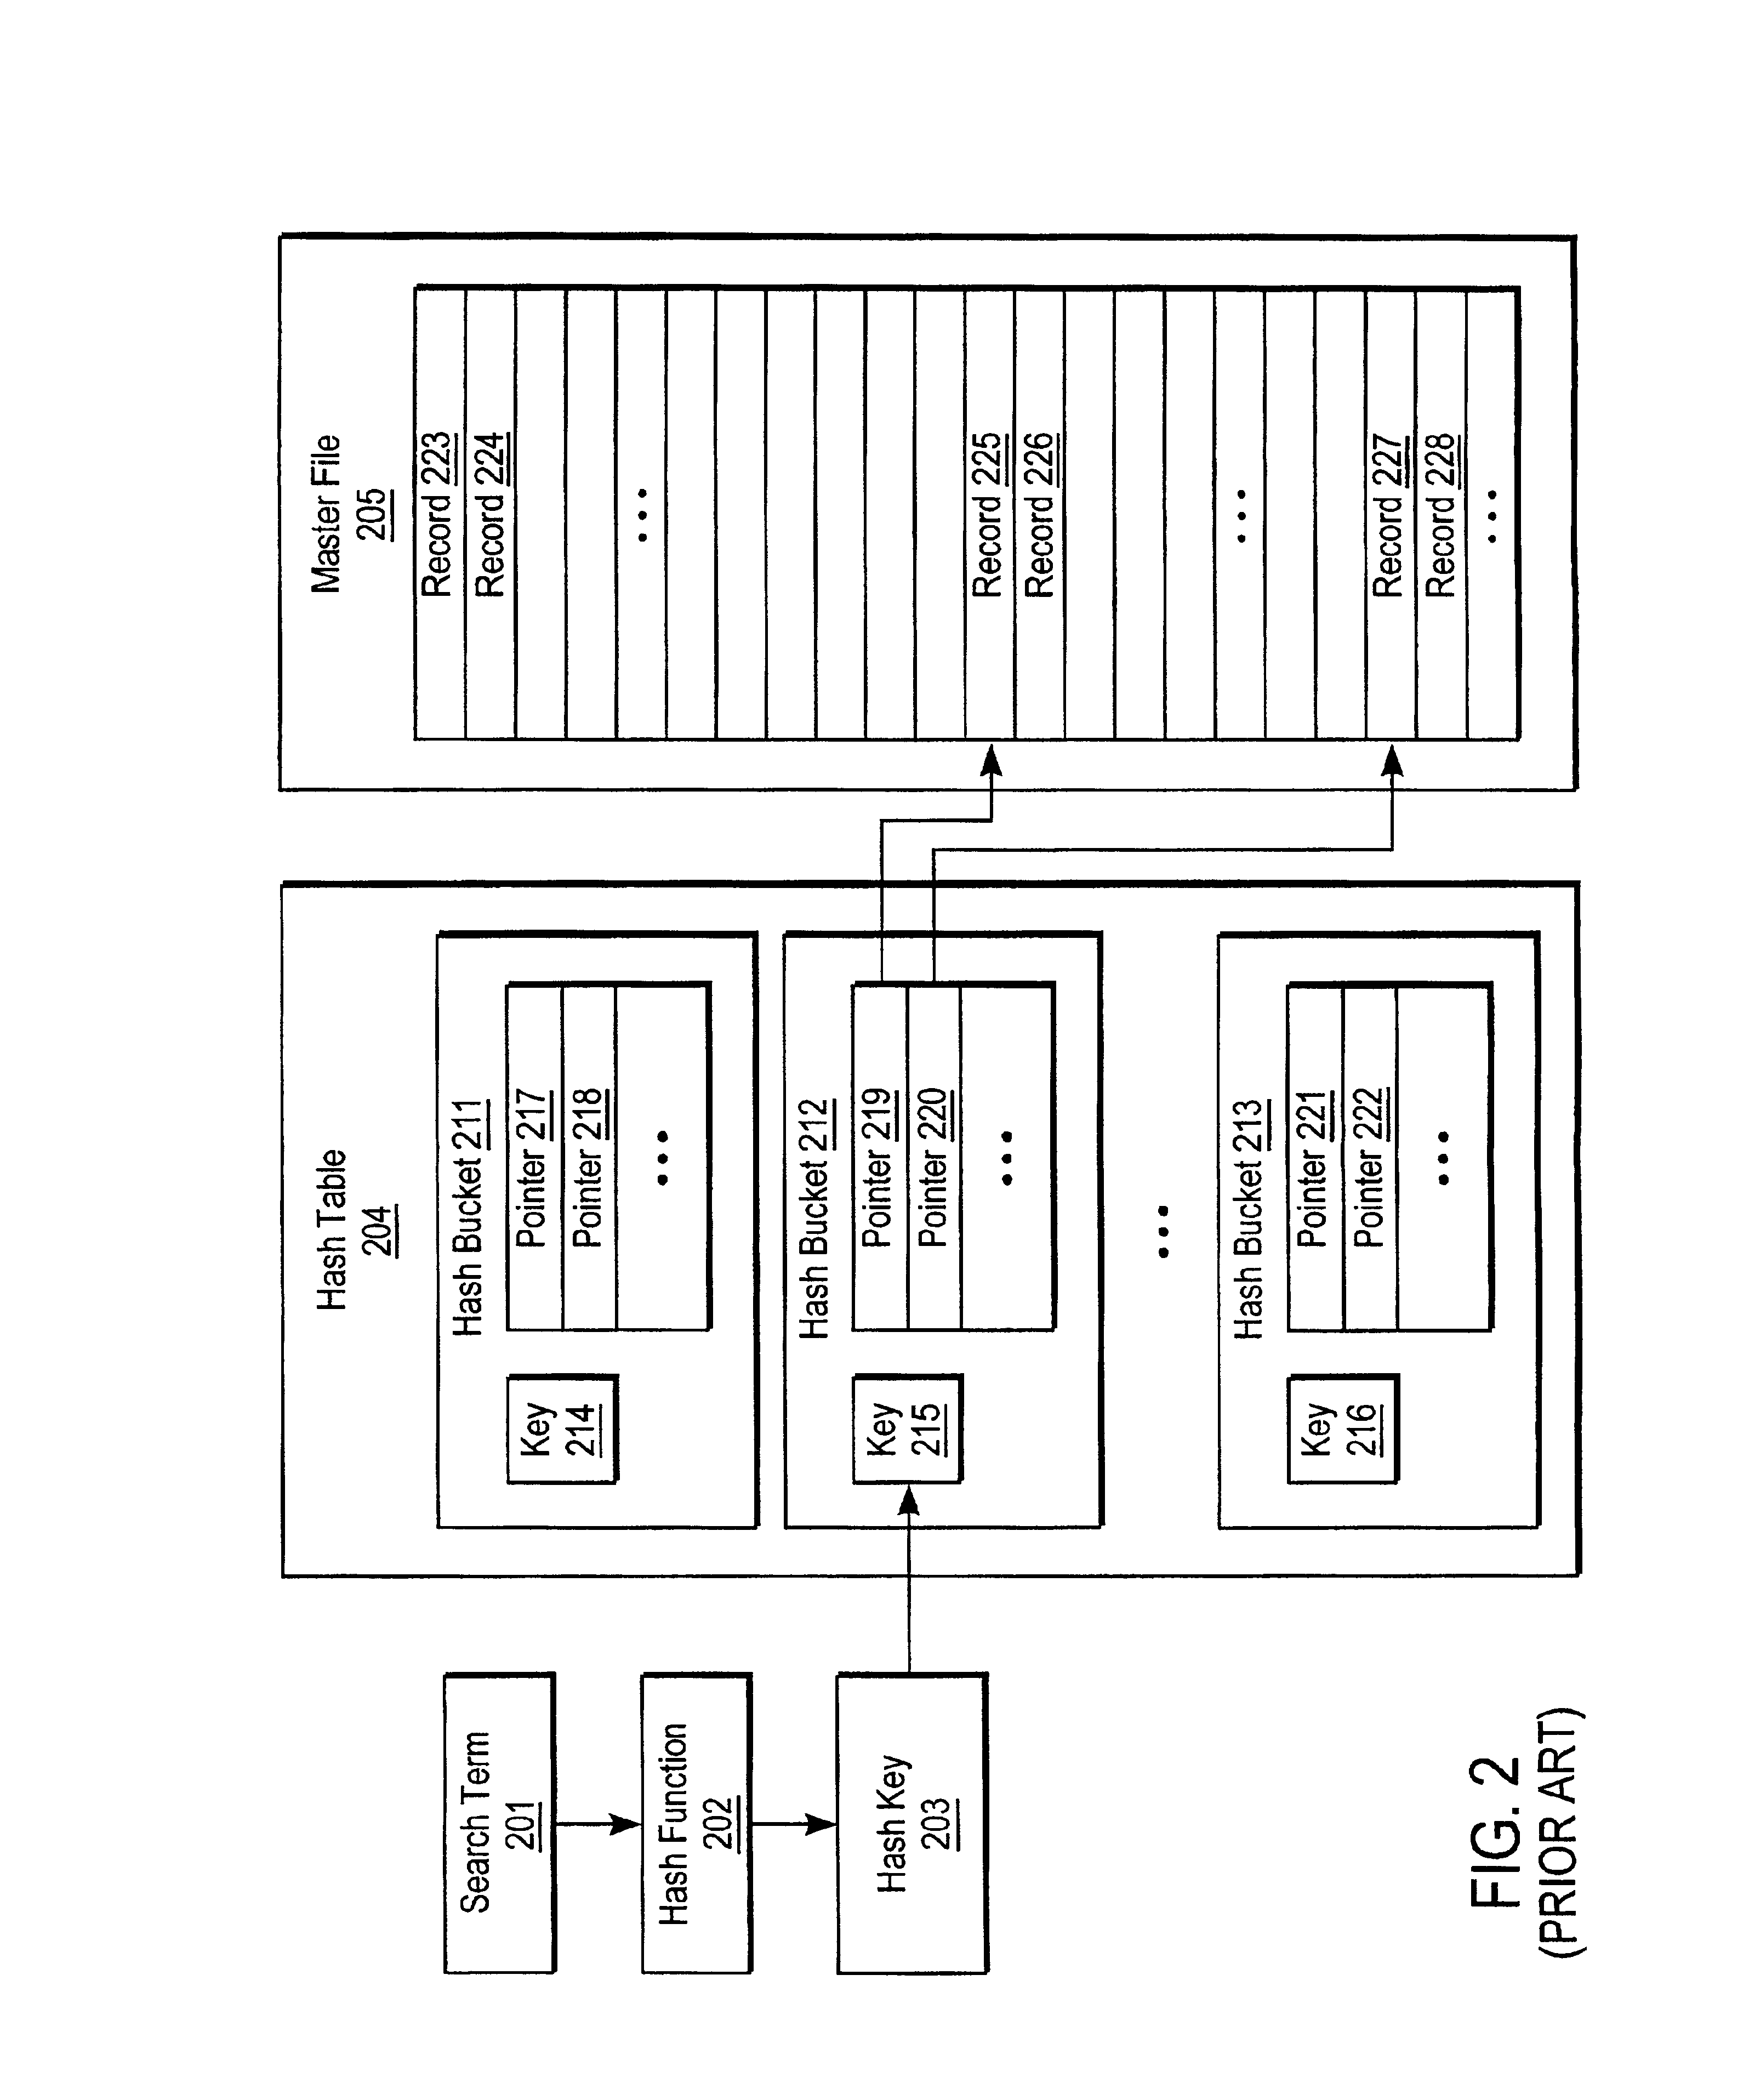 System and method for rapidly identifying the existence and location of an item in a file